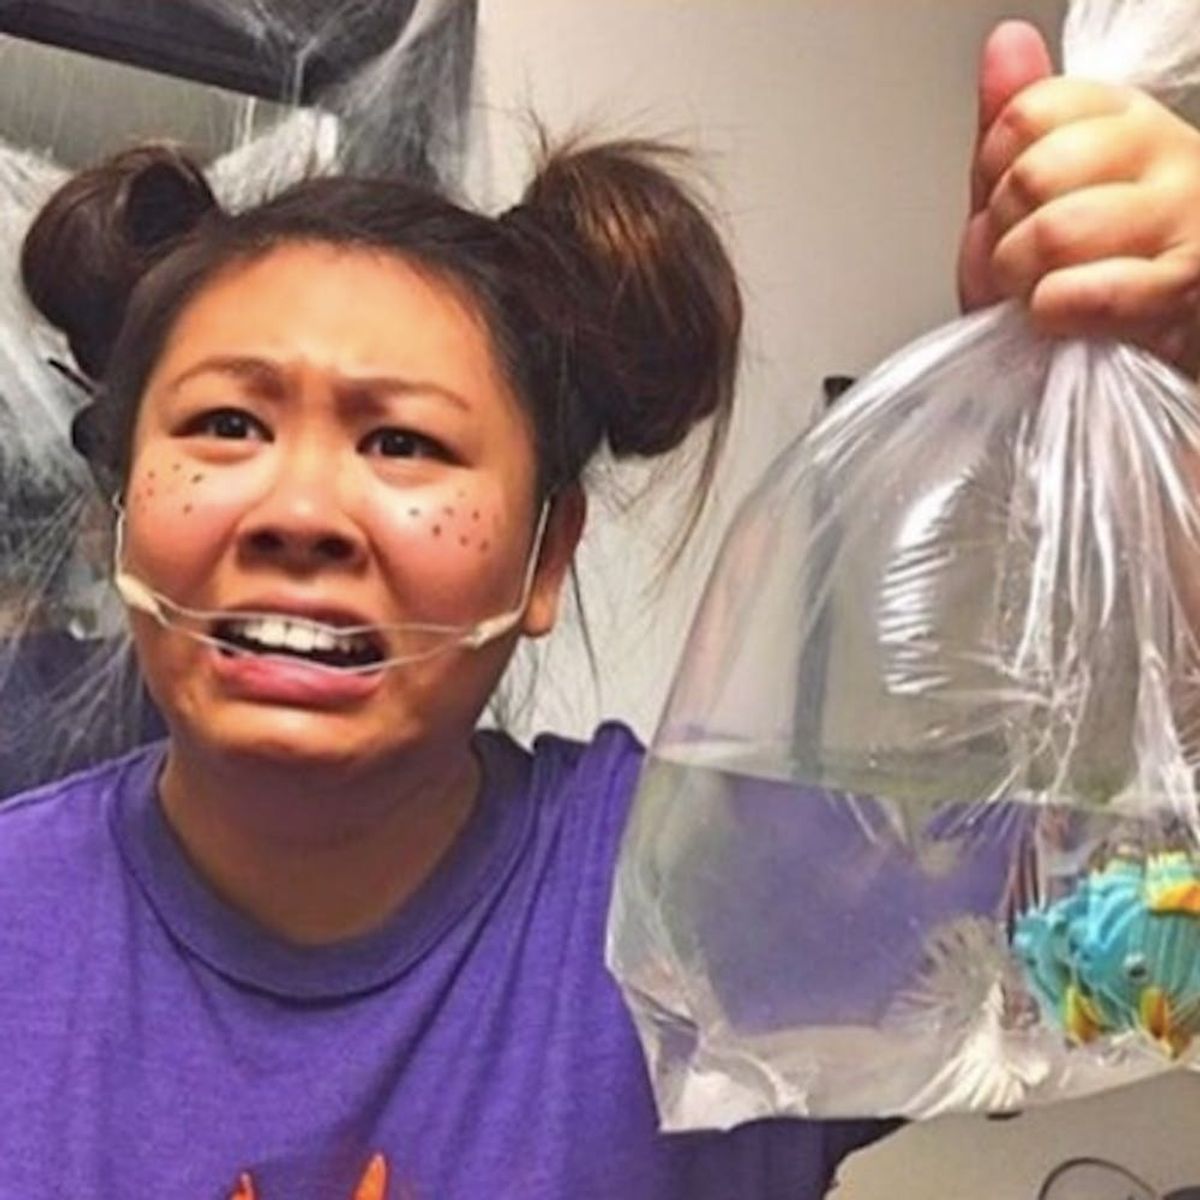 61 Magical Disney Halloween Costumes That Bring Out Your Inner Kid